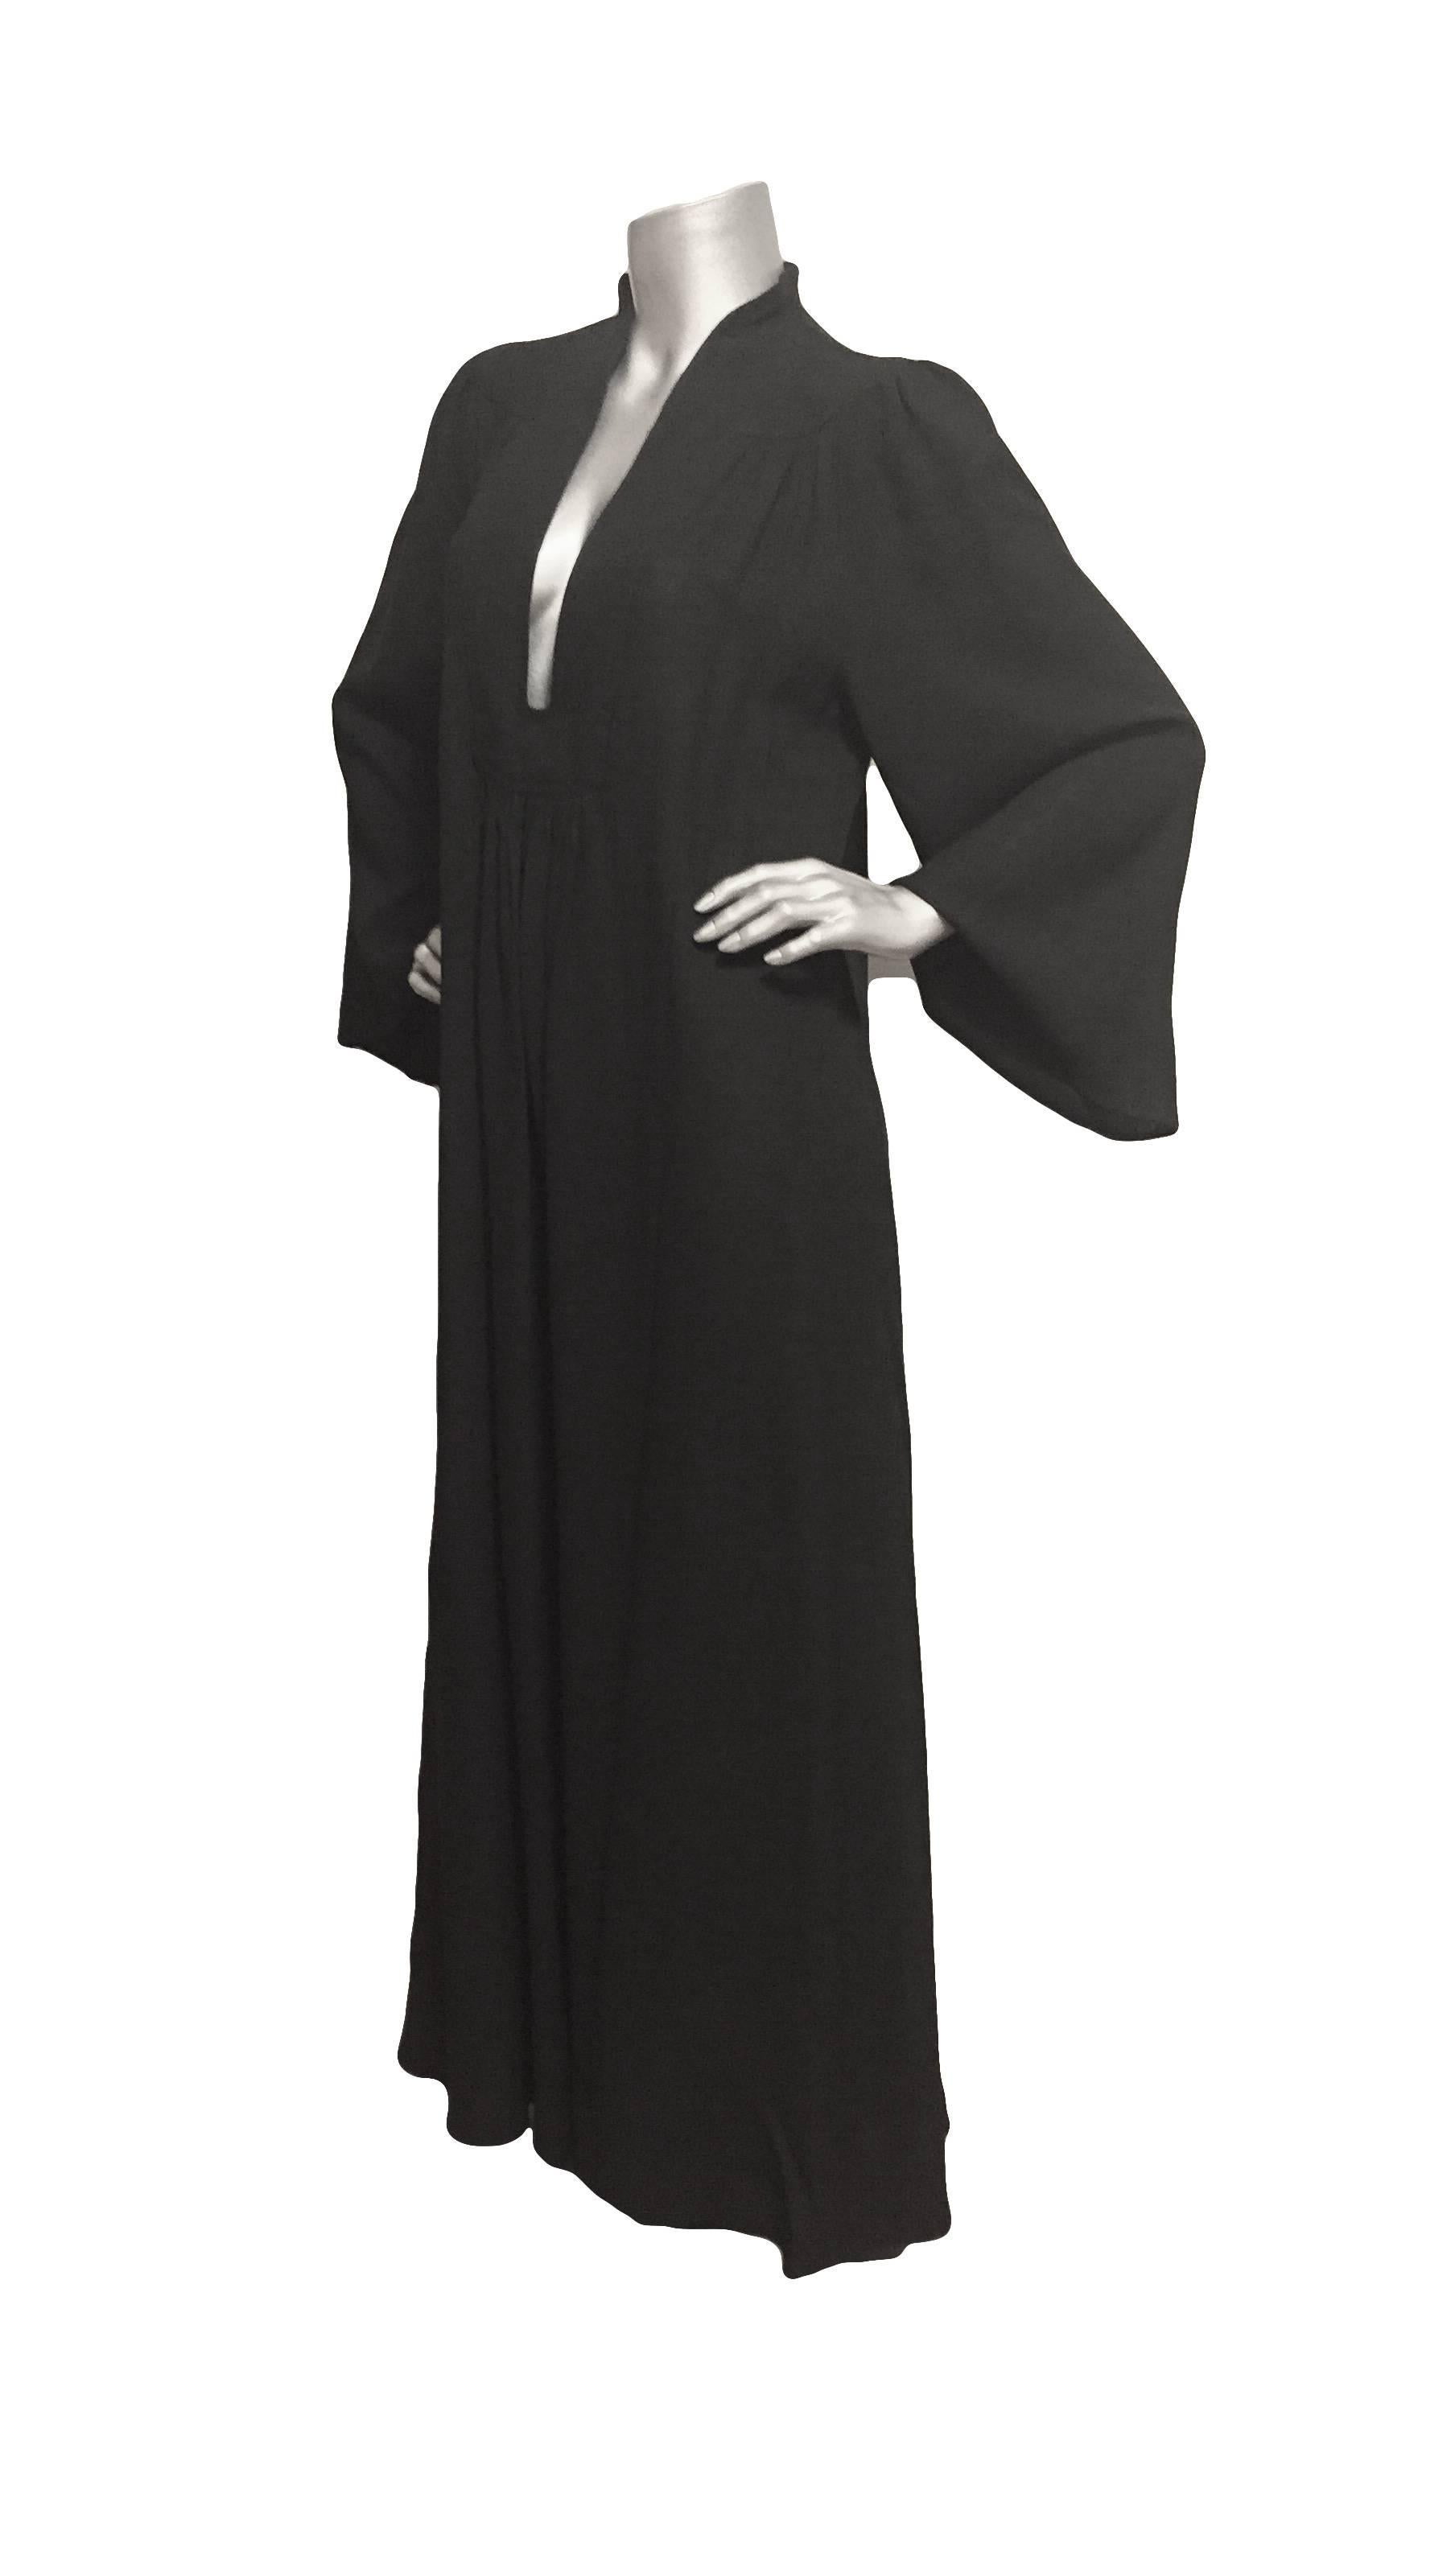 Fabulous Ossie Clark loose fitting black crepe moss dress with long sleeves and a plunging neckline from the 1970s, Studio 54 style.